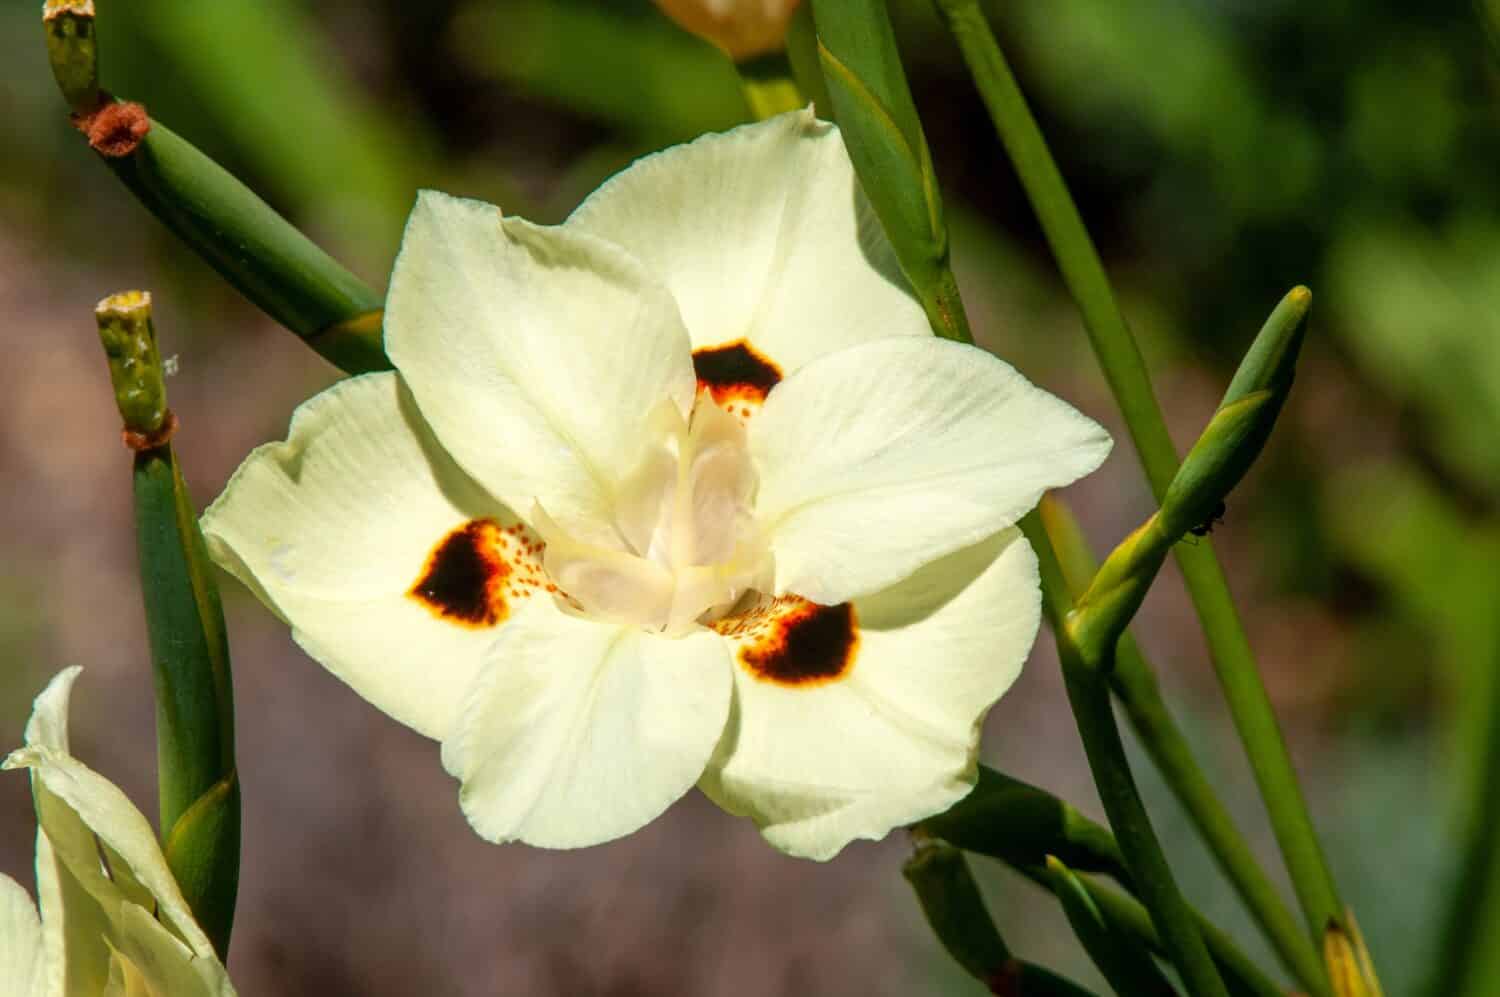 Sydney Australia, close-up of a pale creamy yellow with dark brown spots of a dietes bicolor